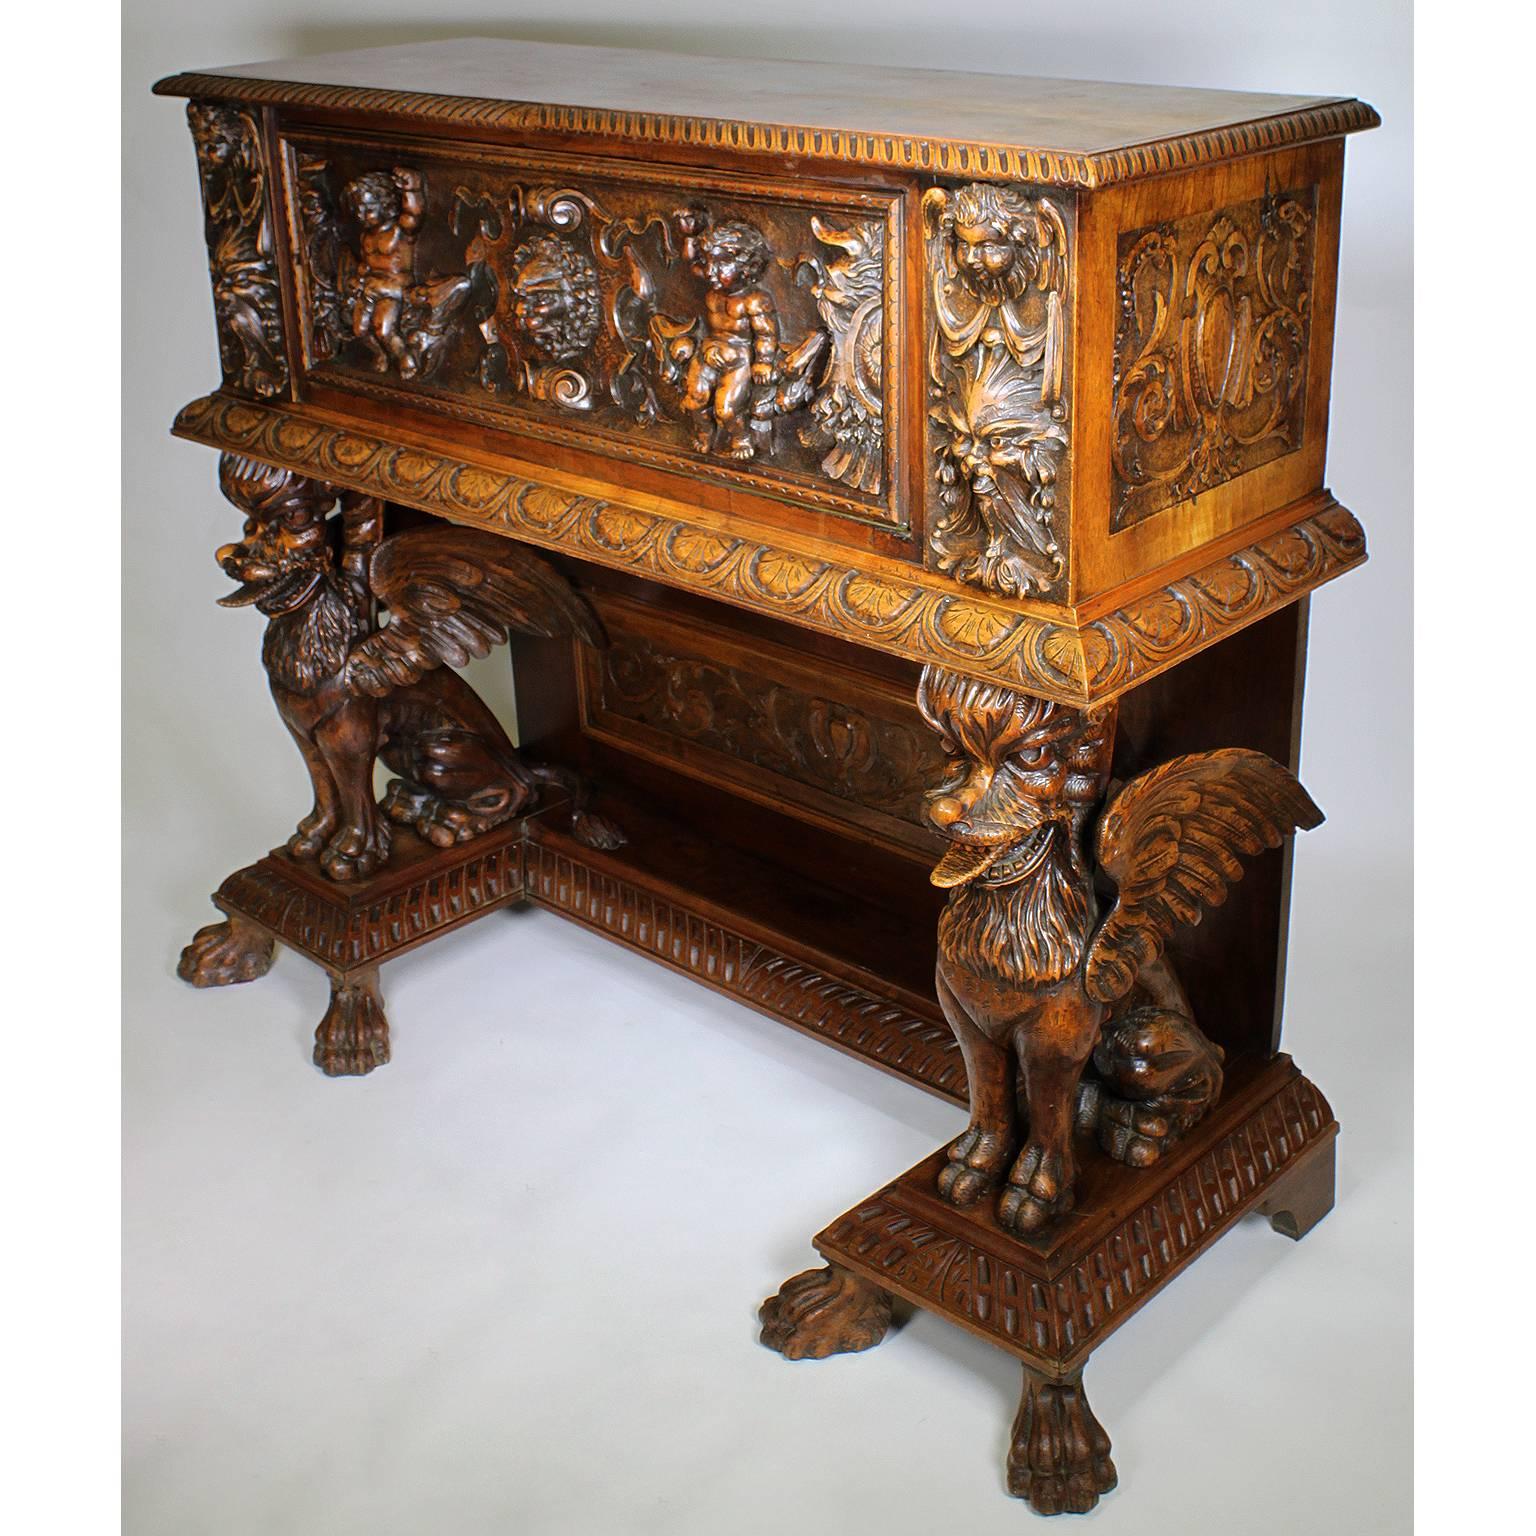 A fine North Italian 19th century Baroque Revival style carved walnut figural cassone drop-front cabinet - Bargueno. The rectangular carved 